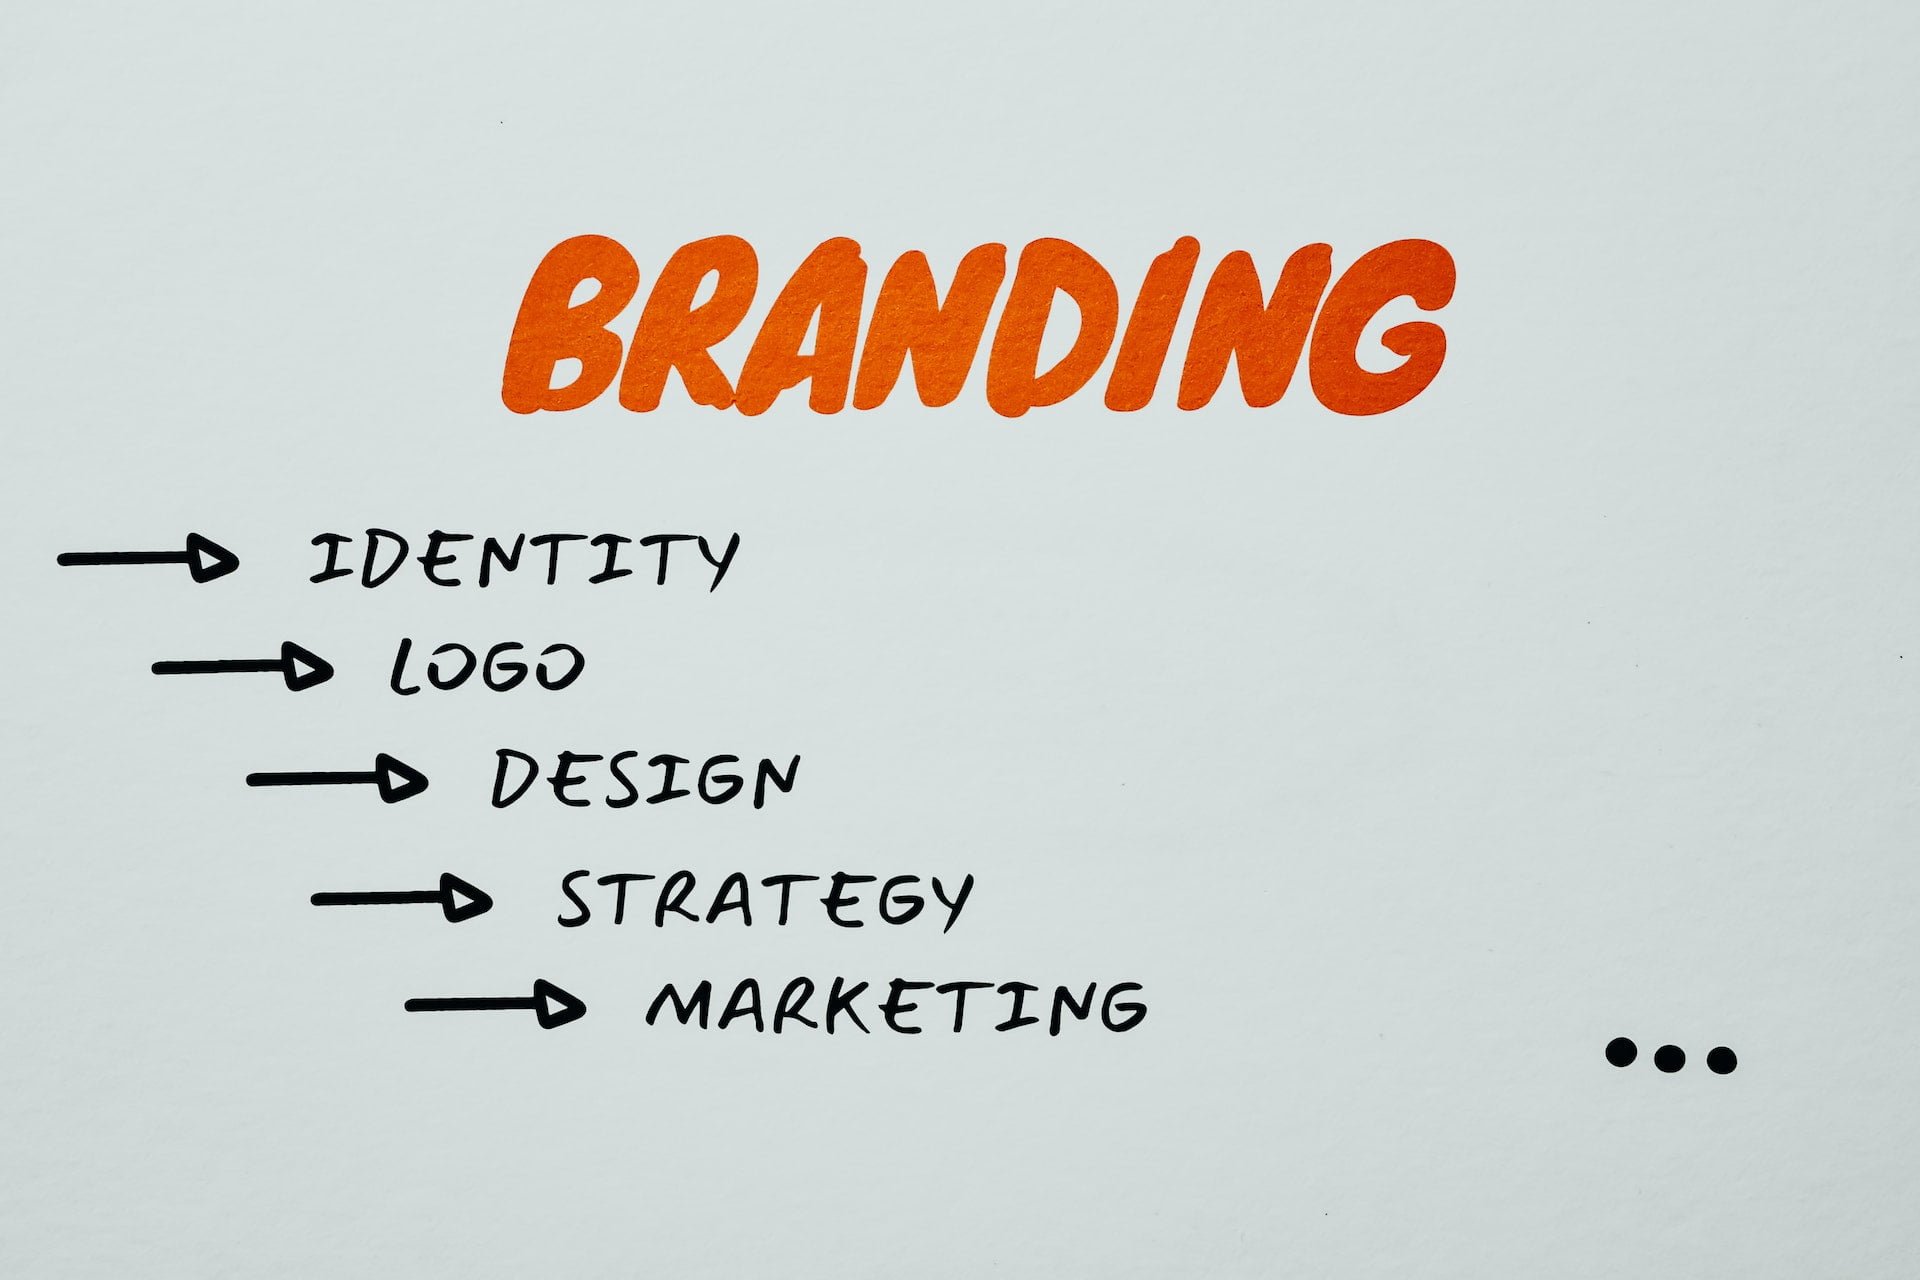 What should brand guidelines include